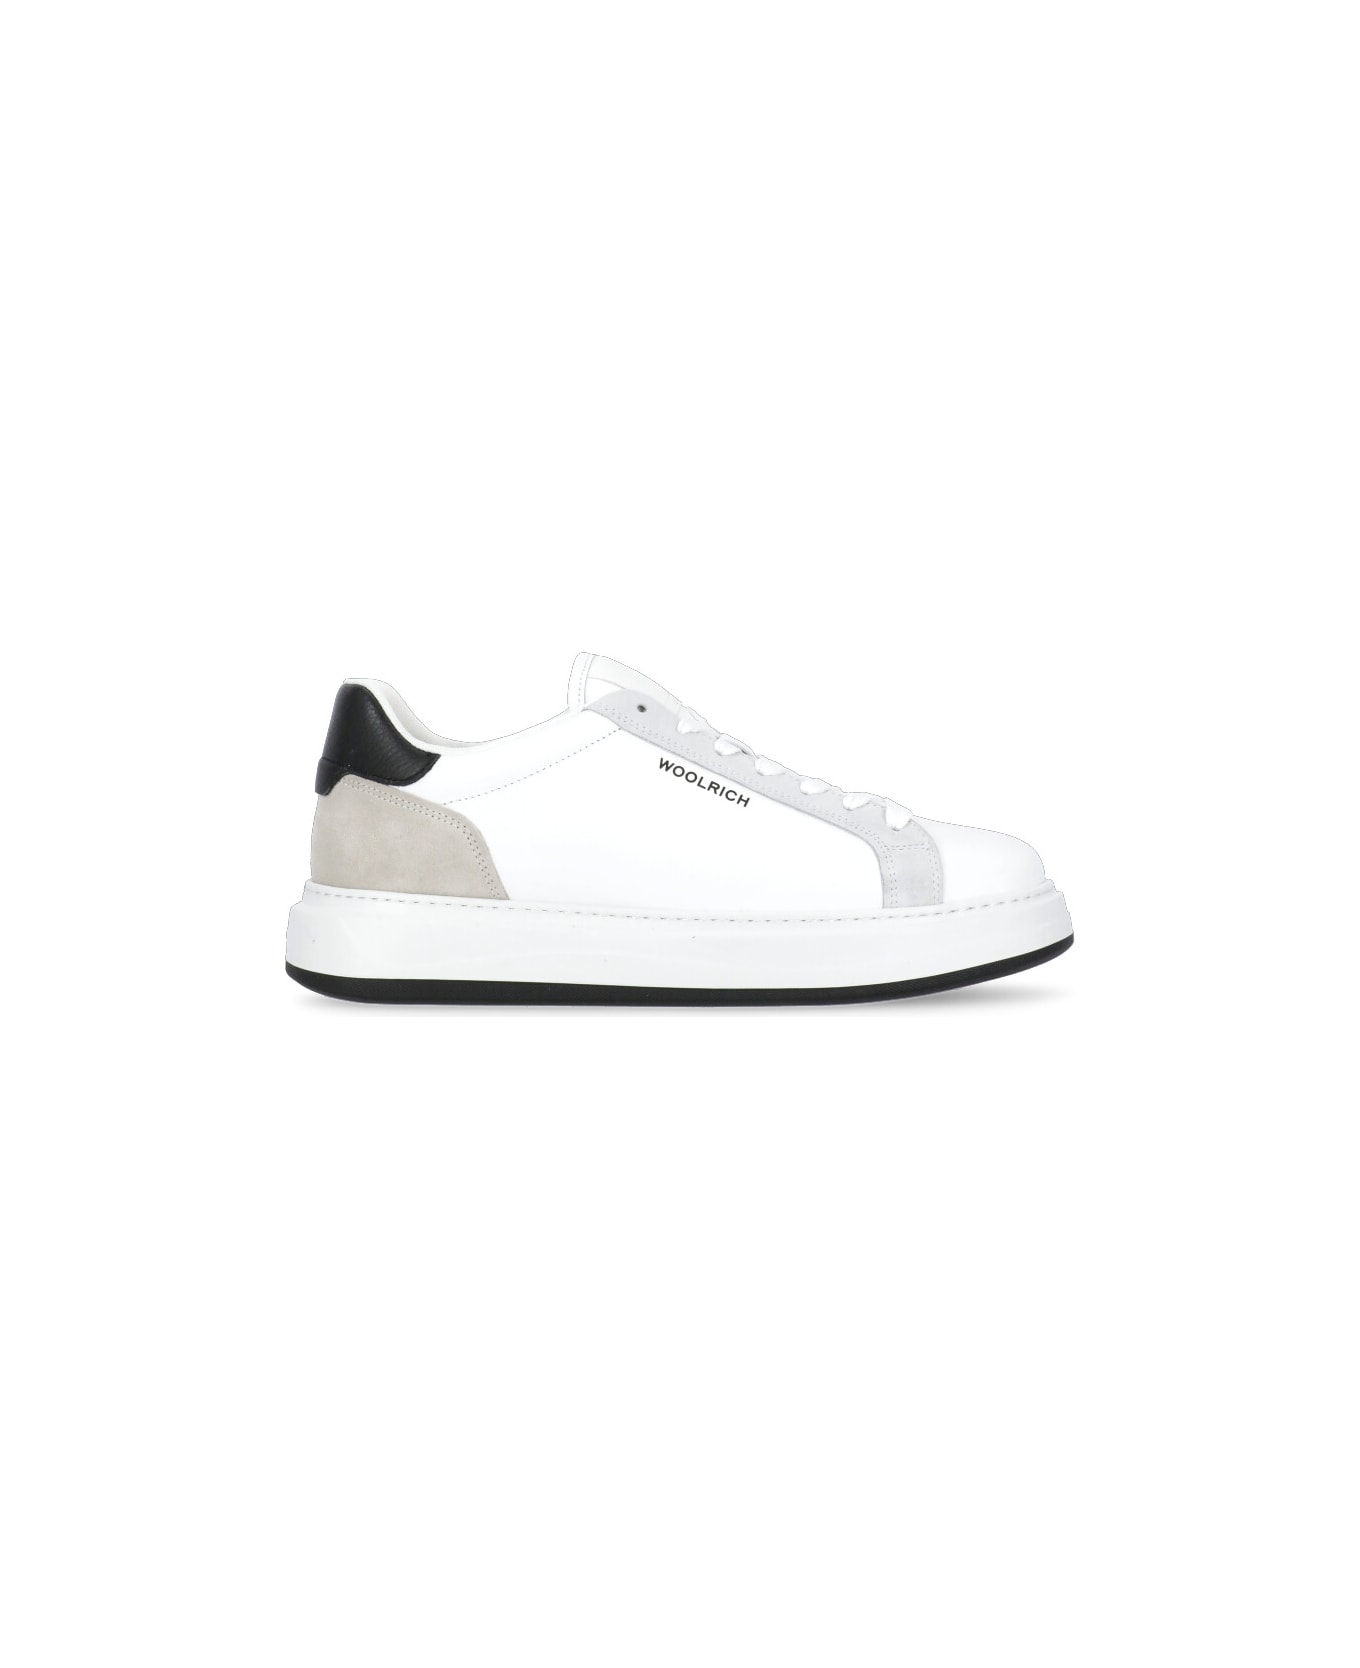 Woolrich 'arrow' Leather Sneakers - White スニーカー